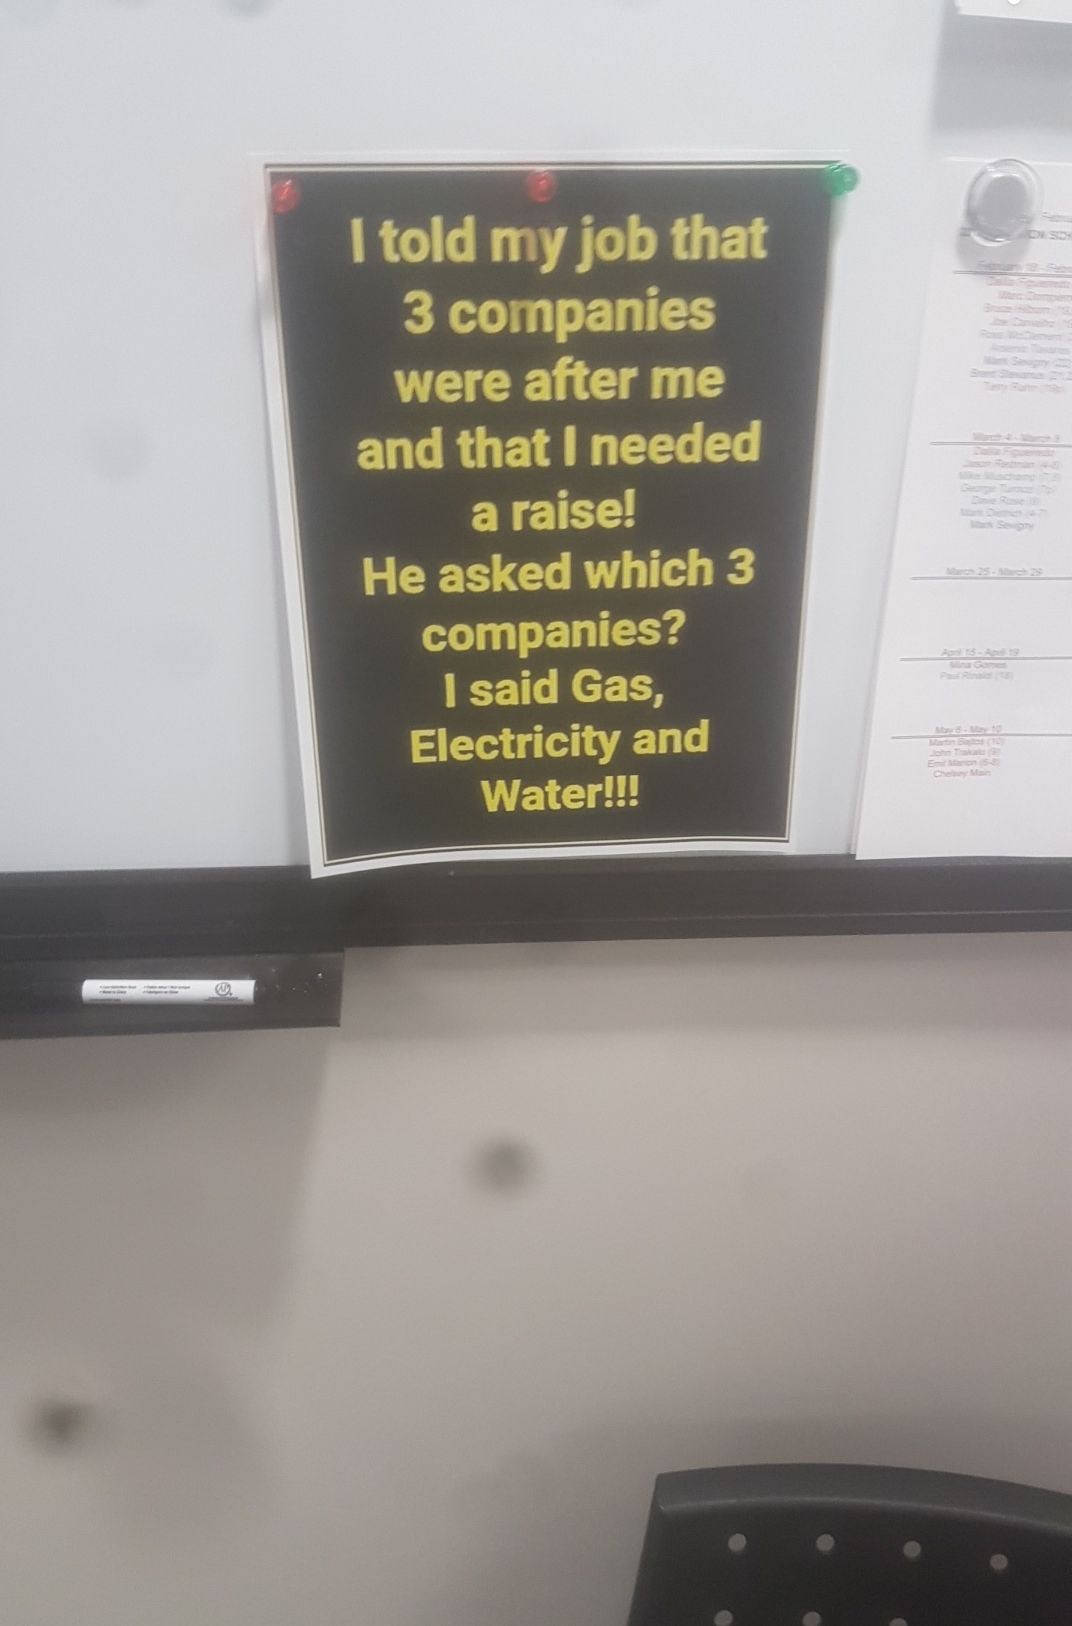 Someone posted this at work, gave me a chuckle